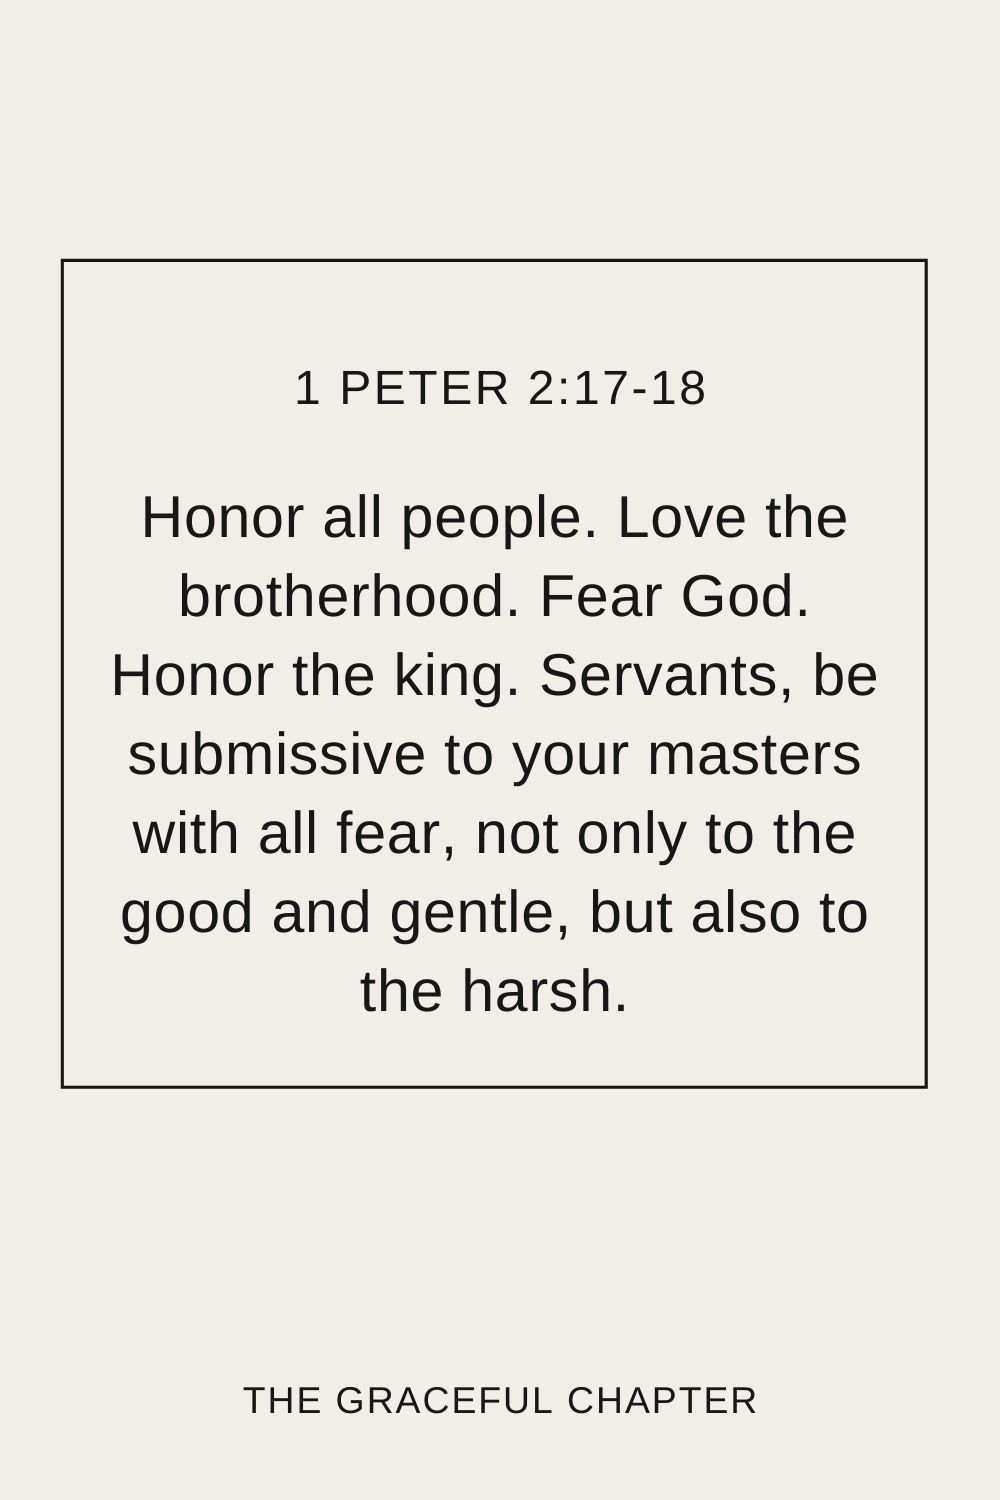 Honor all people. Love the brotherhood. Fear God. Honor the king. Servants, be submissive to your masters with all fear, not only to the good and gentle, but also to the harsh. 1 Peter 2:17-18